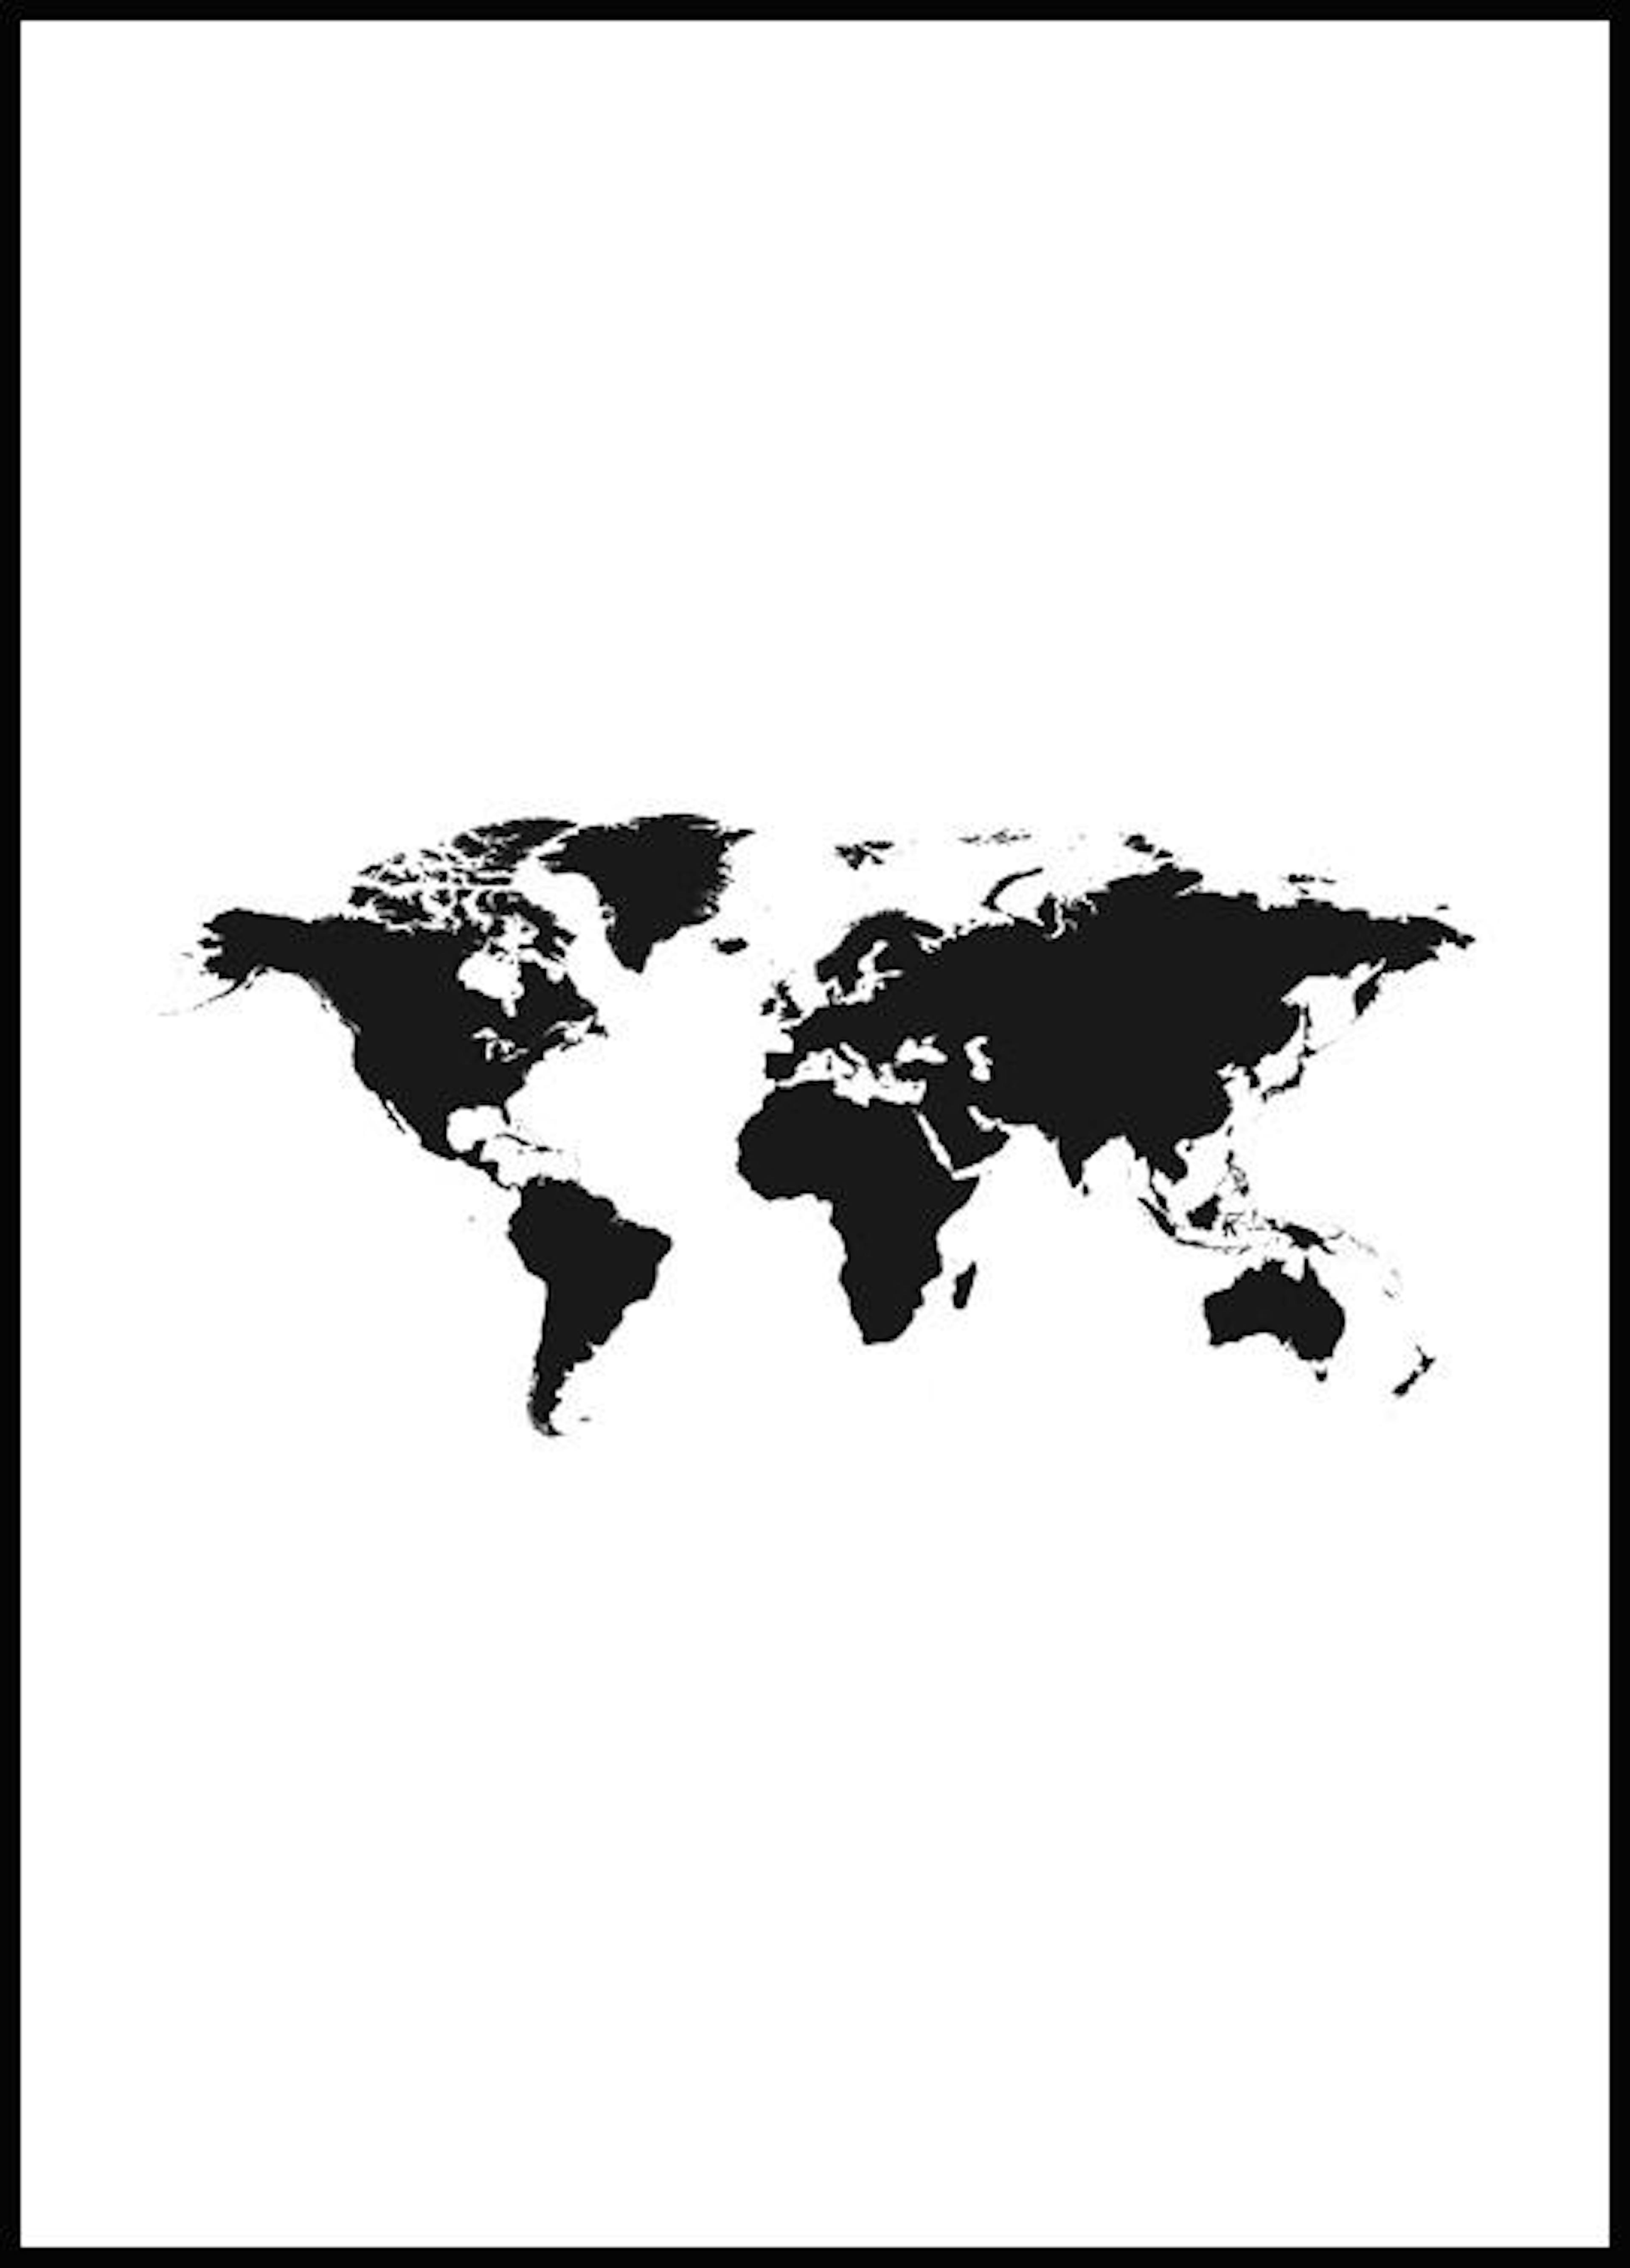 World Map 2 Poster 0